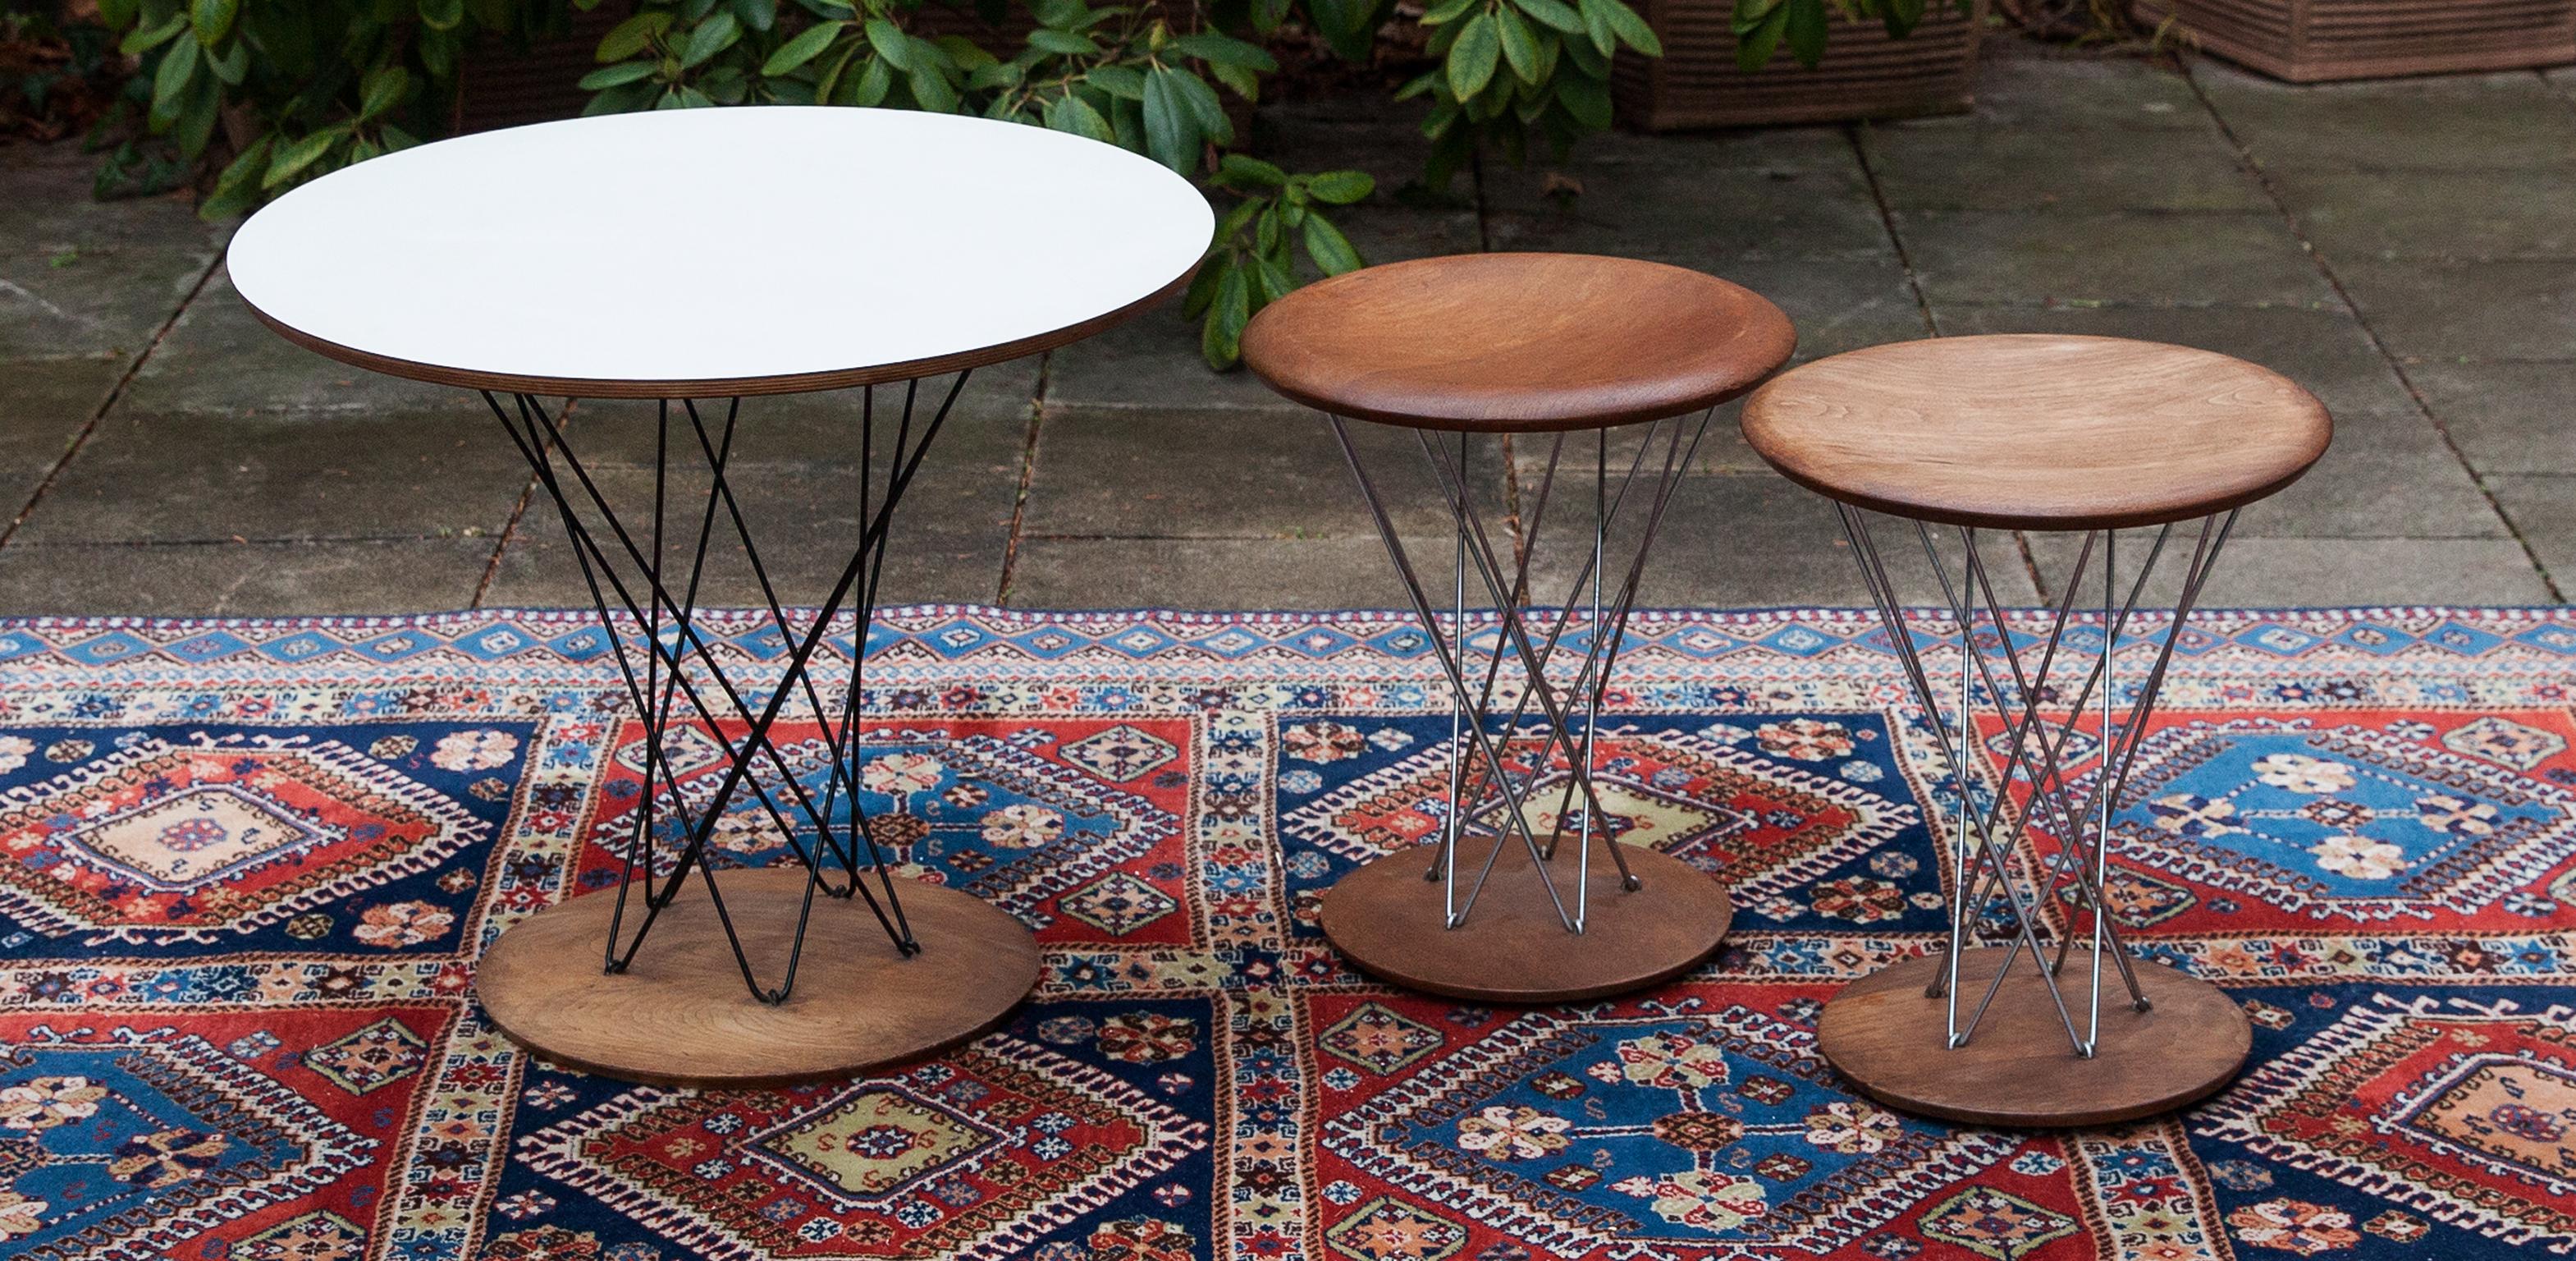 This set is a real piece of contemporary history of Mid Century Design and was exhibited with other objects by Isamu Noguchi in the pavilion of the USA at the World’s Fair in Brussels 1958. Isamu Noguchi designed the Cyclone table and the Rocking